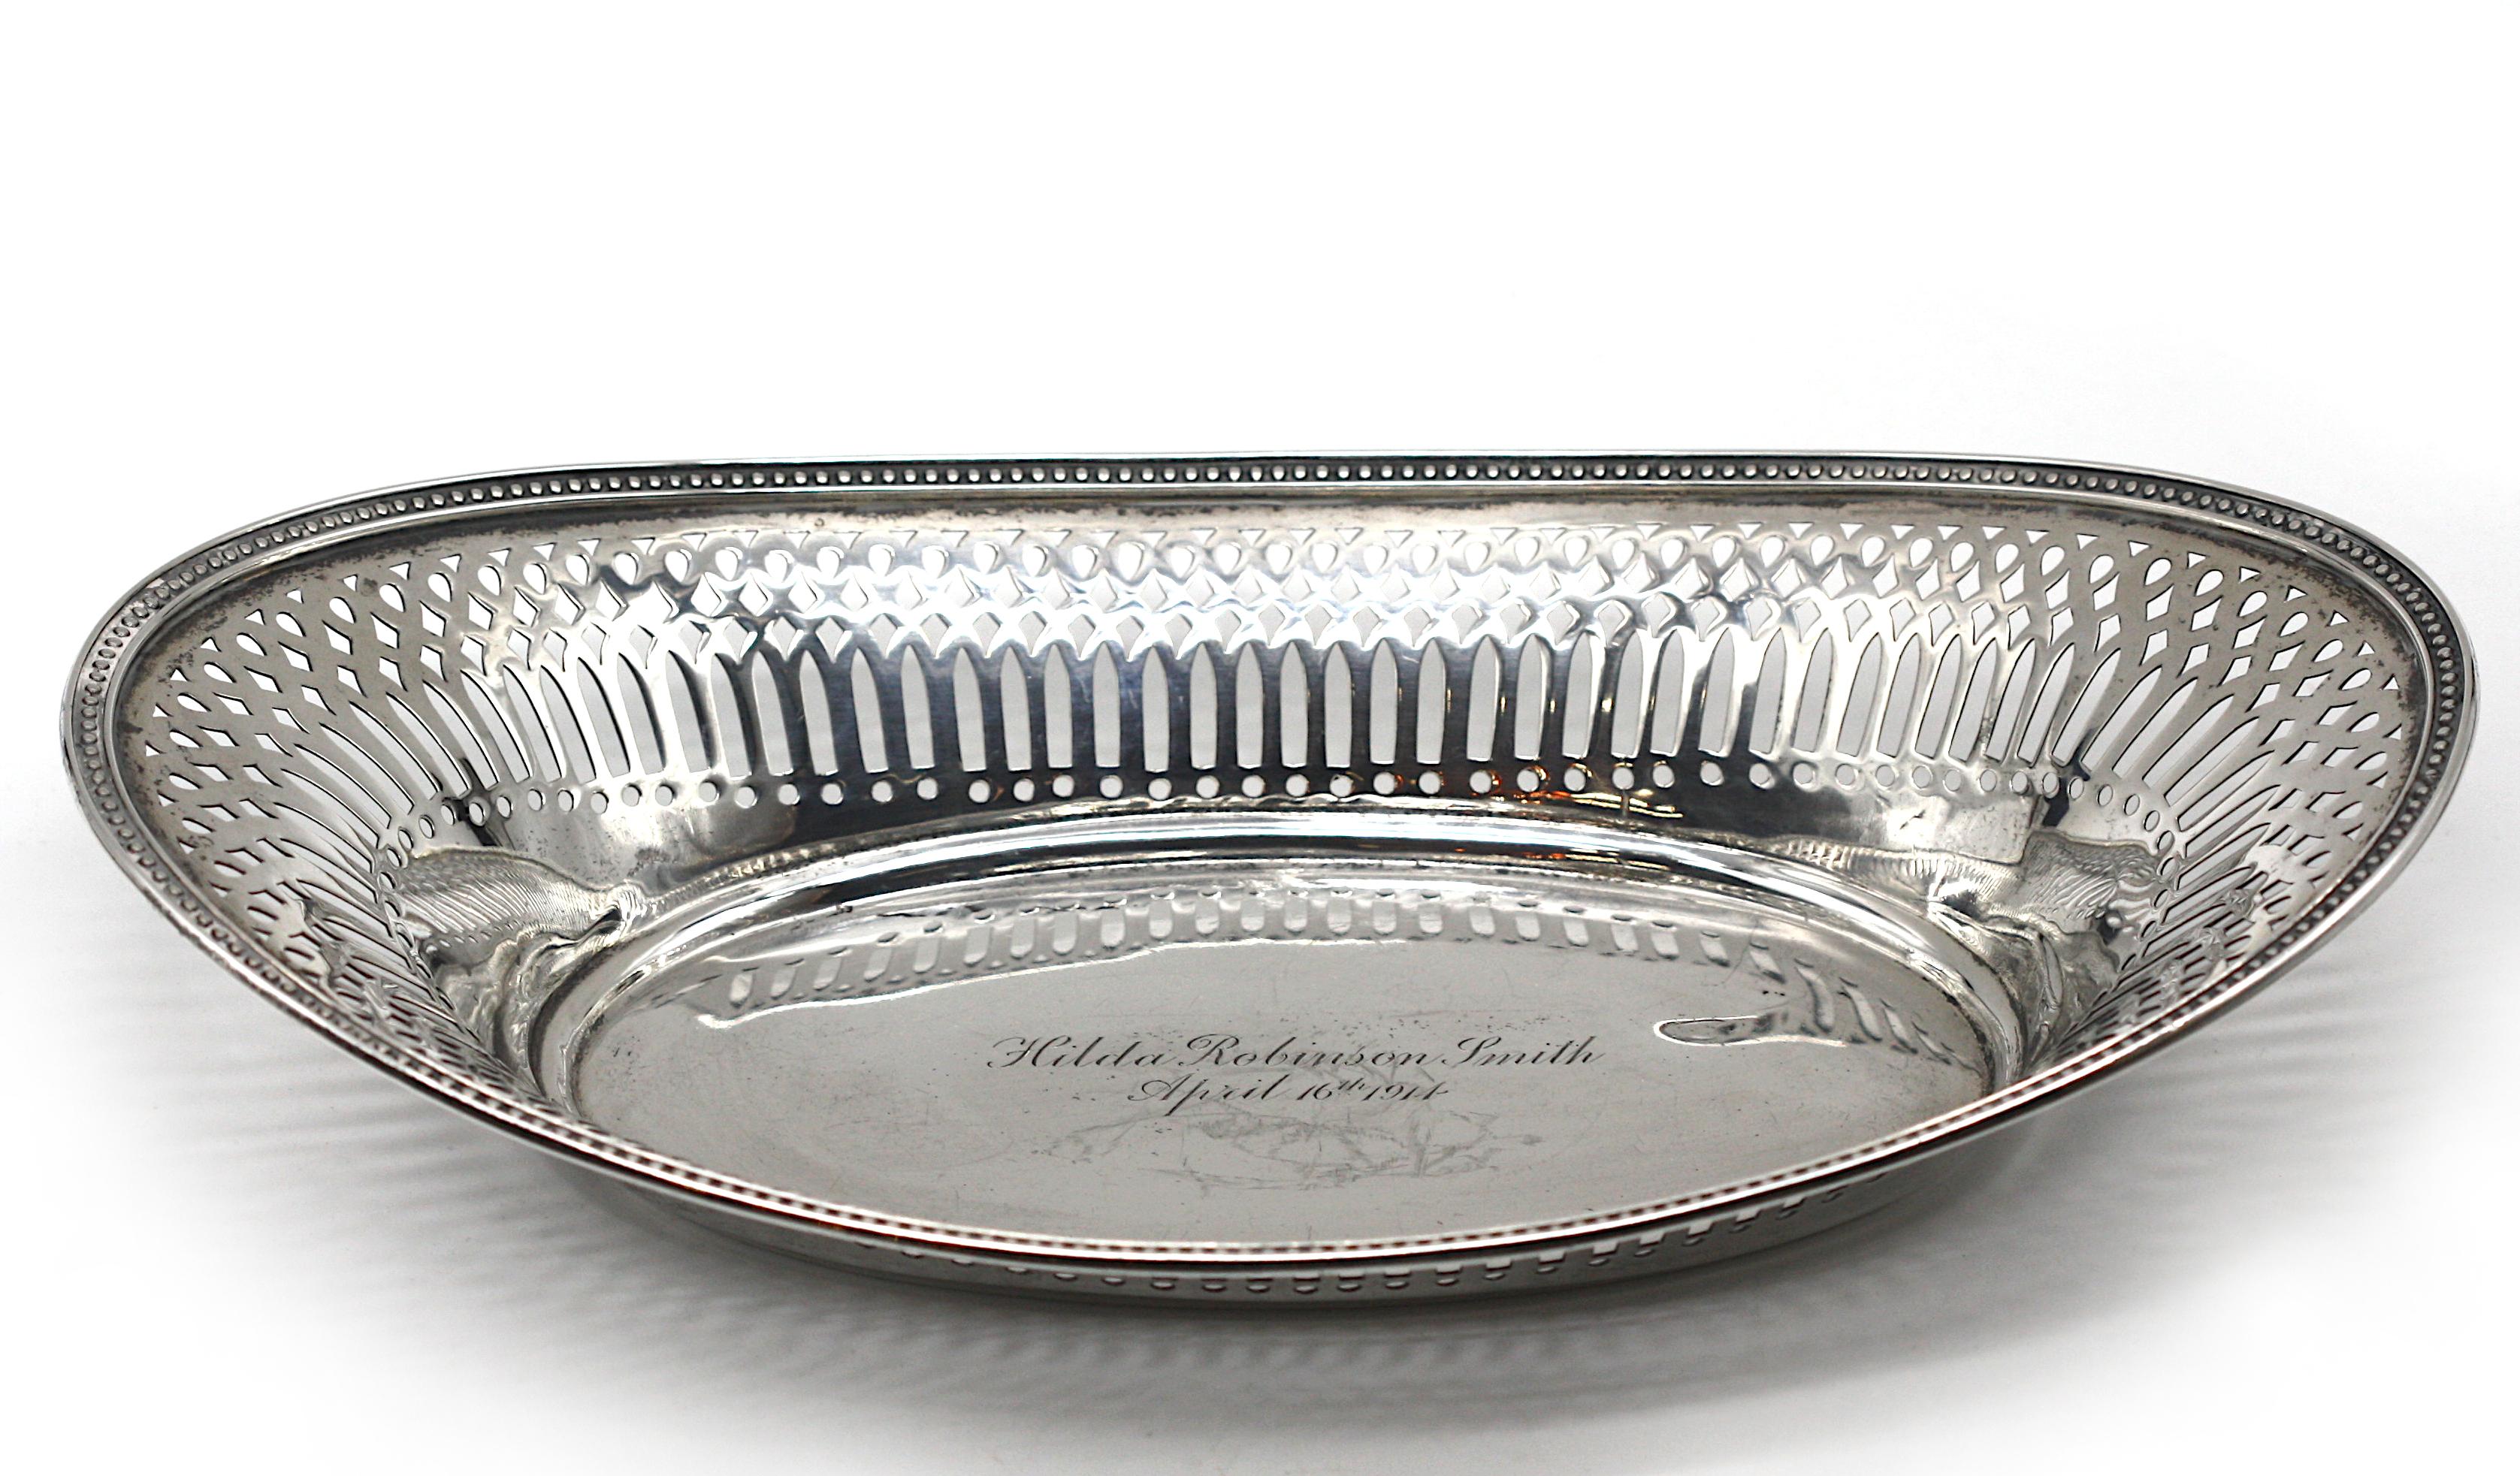 Tiffany & Co. Sterling Silver Bread Tray In Good Condition For Sale In West Palm Beach, FL